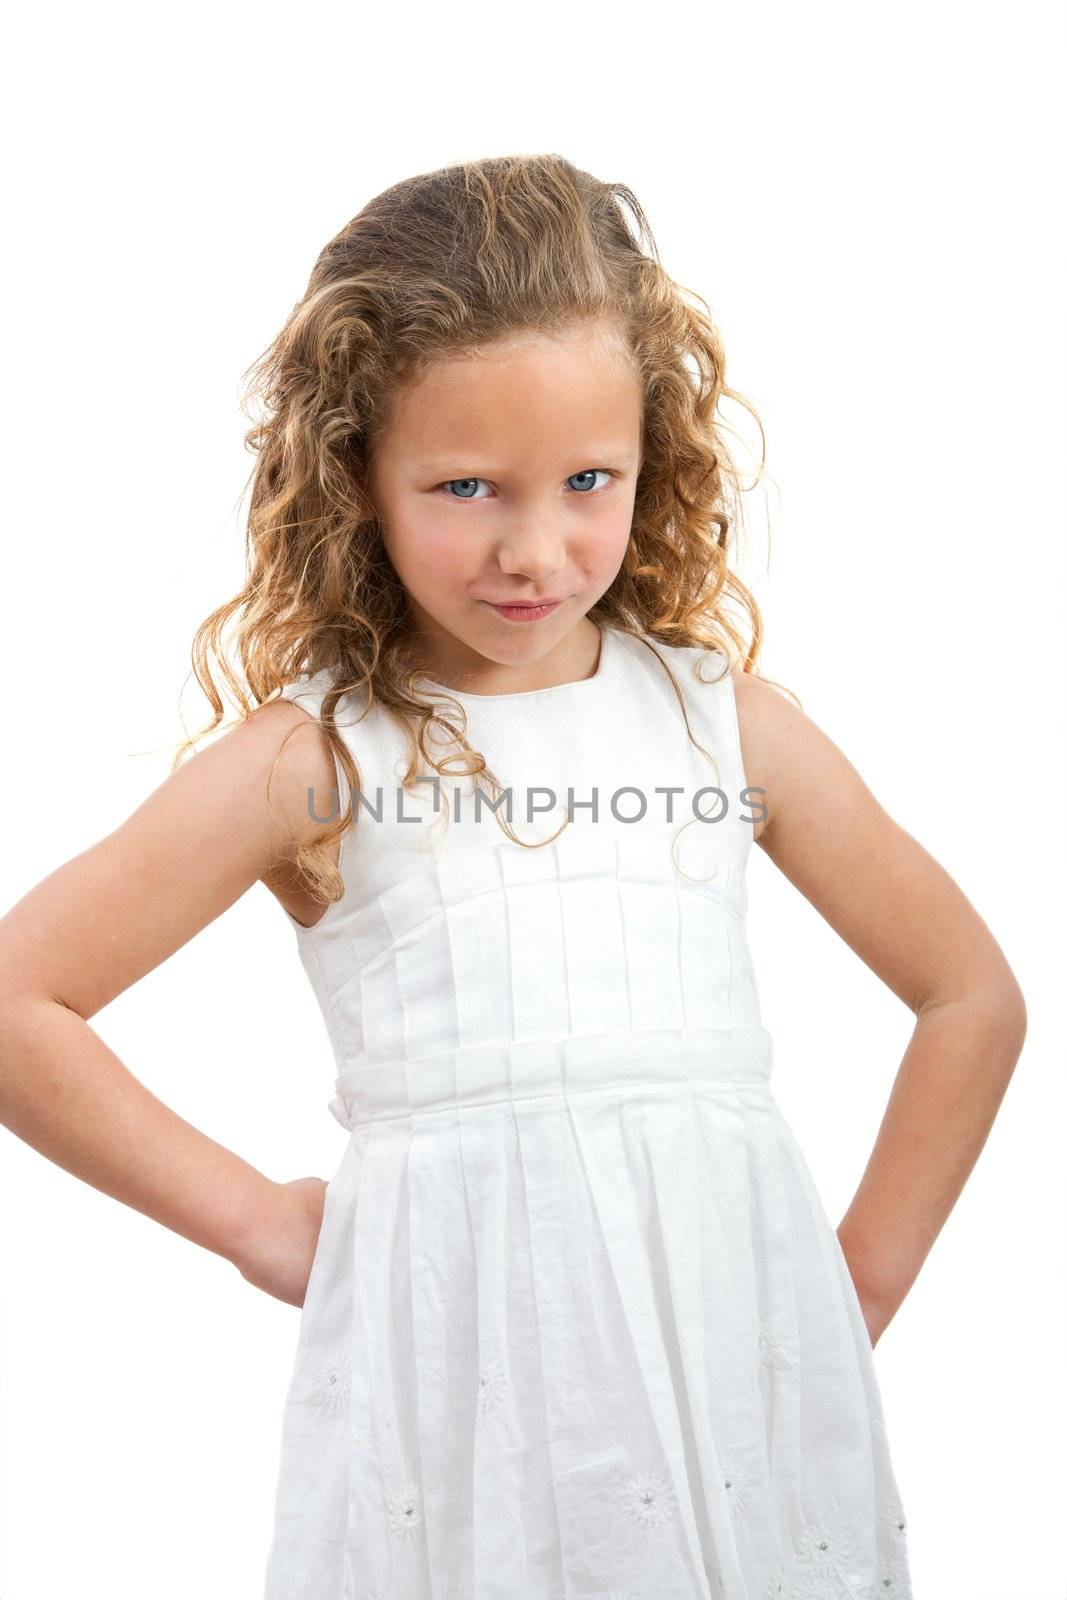 Portrait of  little girl with angry face expression. Isolated on white background.